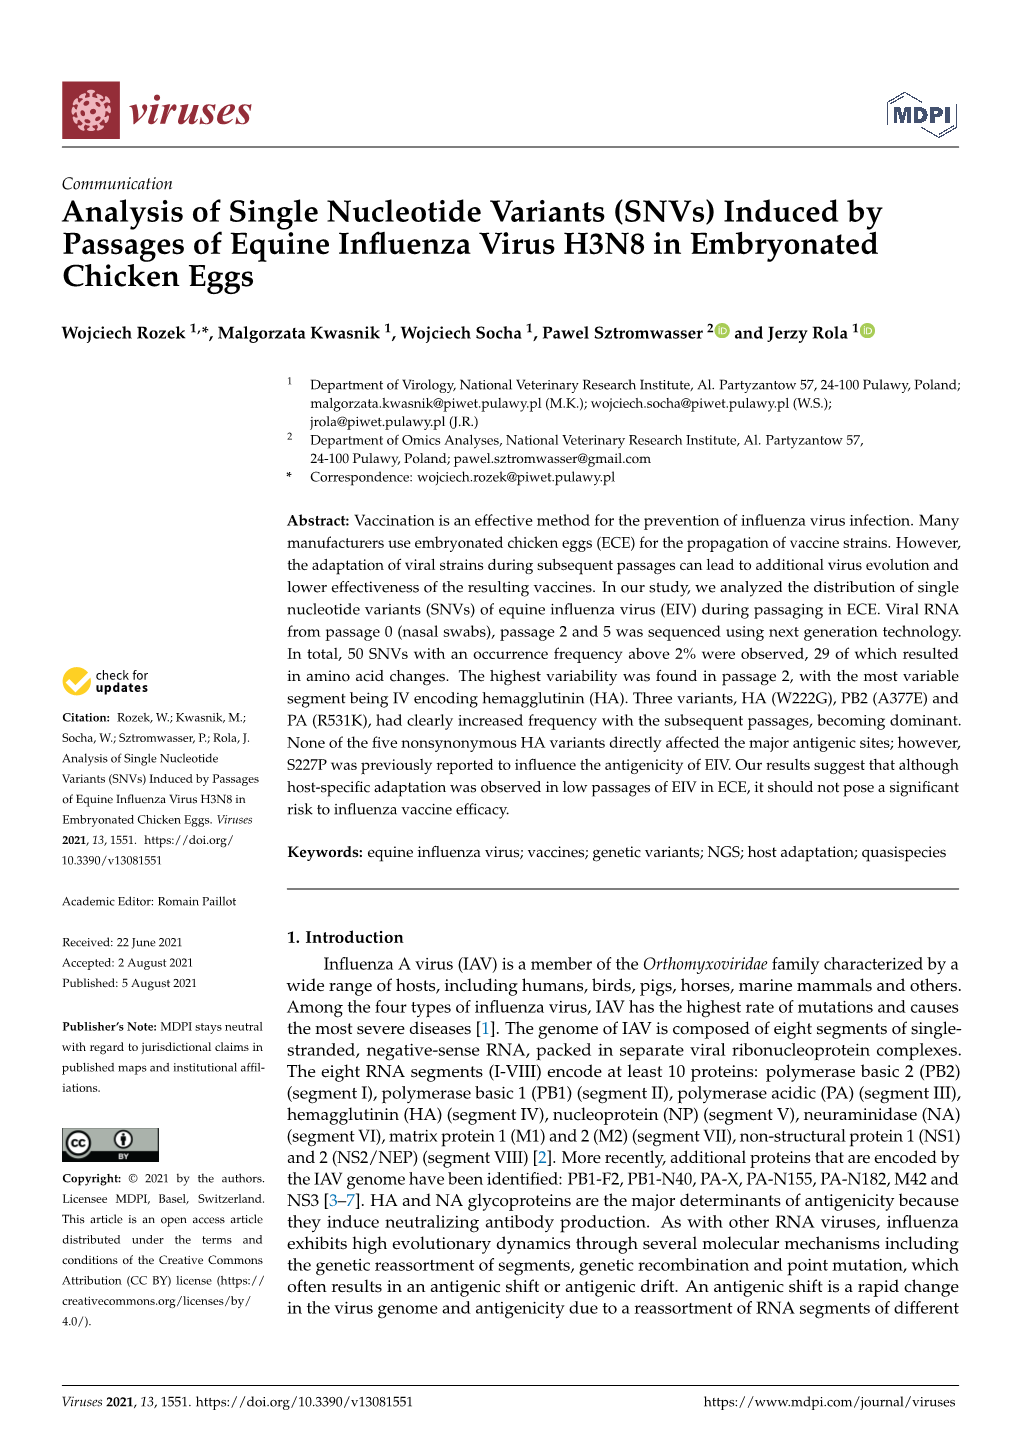 Analysis of Single Nucleotide Variants (Snvs) Induced by Passages of Equine Influenza Virus H3N8 in Embryonated Chicken Eggs